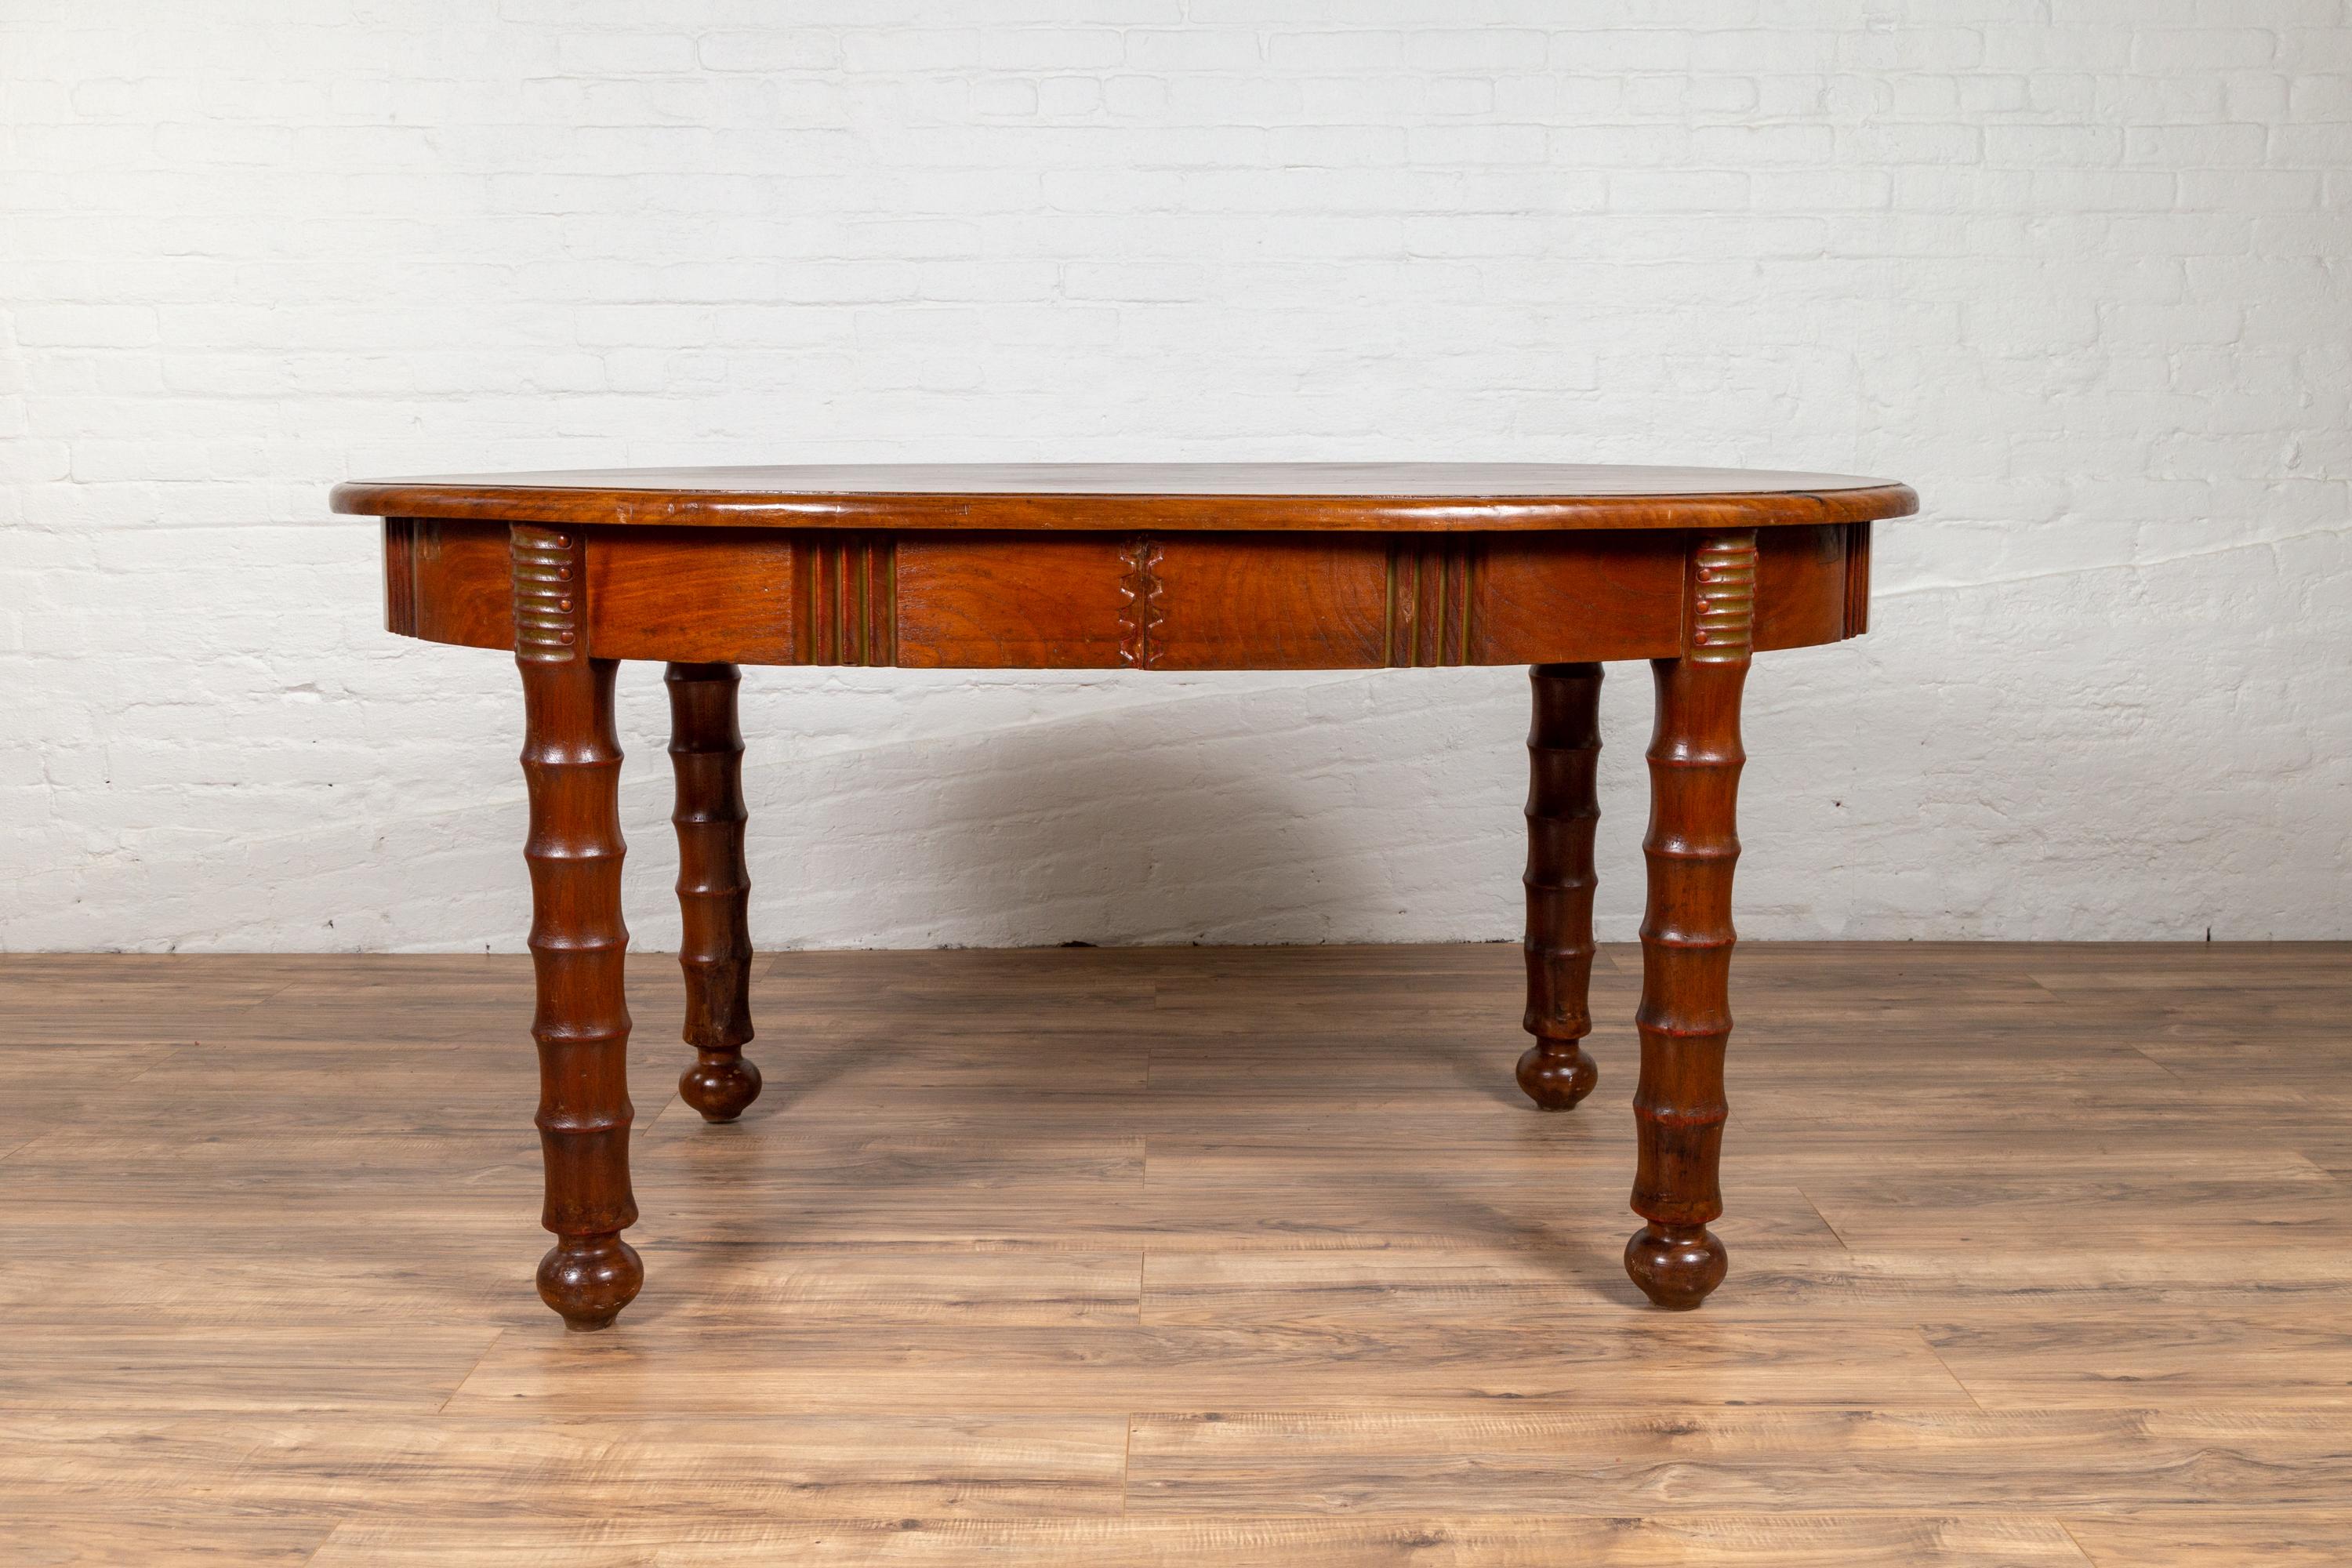 Antique Oval Dining Room Table from Indonesia with Spindle Legs and Warm Patina For Sale 8